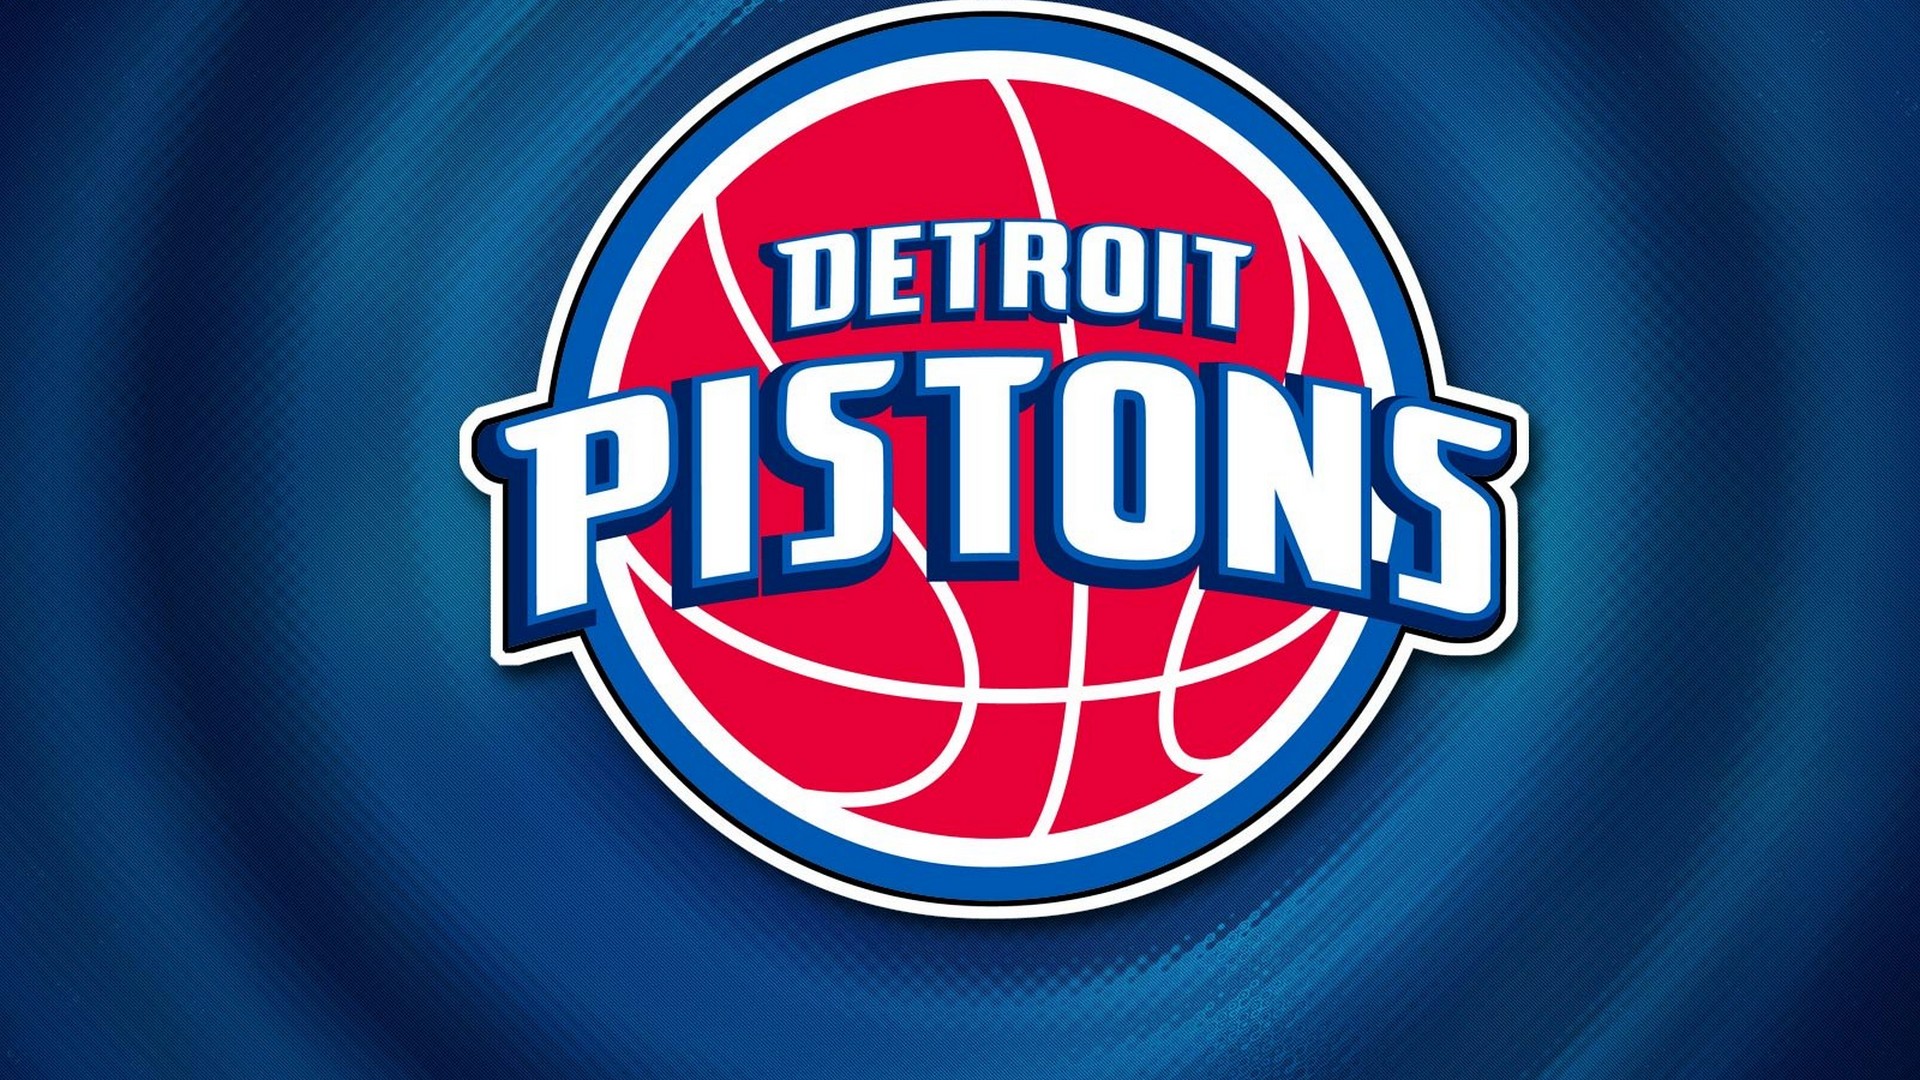 Detroit Pistons Logo For Desktop Wallpaper with high-resolution 1920x1080 pixel. You can use this wallpaper for your Desktop Computer Backgrounds, Windows or Mac Screensavers, iPhone Lock screen, Tablet or Android and another Mobile Phone device